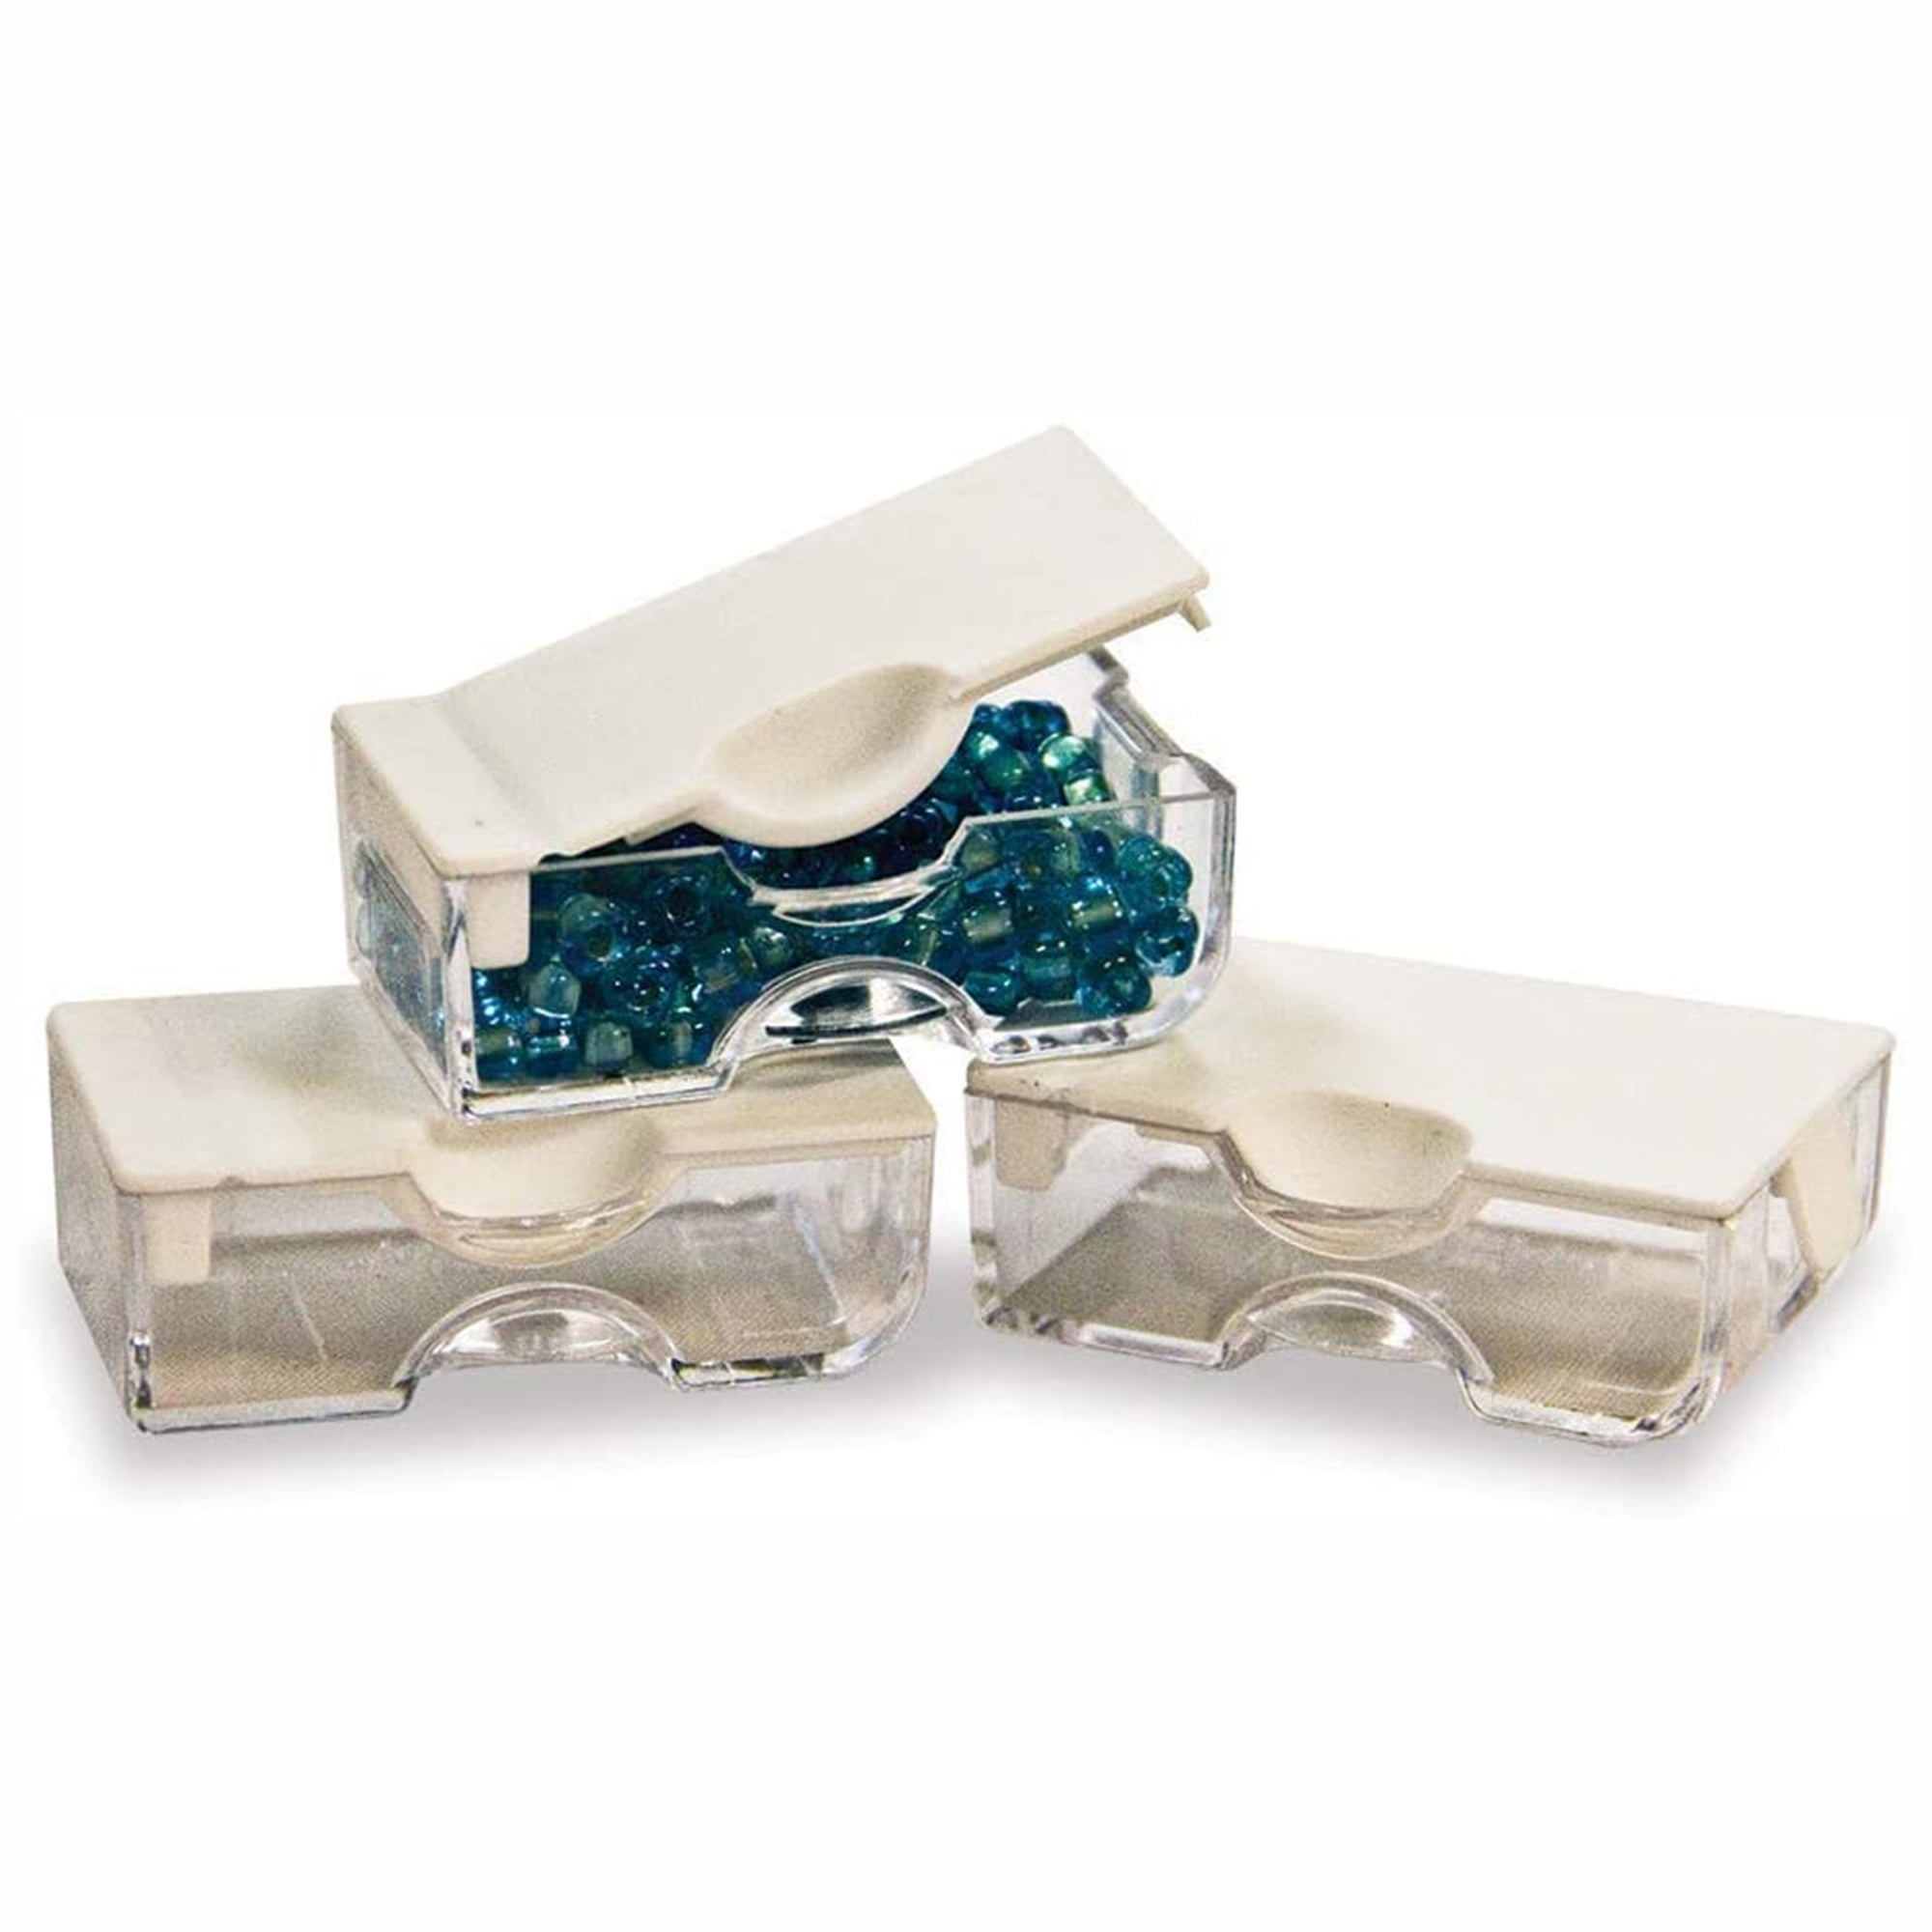 Bead Storage Solutions Elizabeth Ward Assorted Glass and Clay Bead Tray